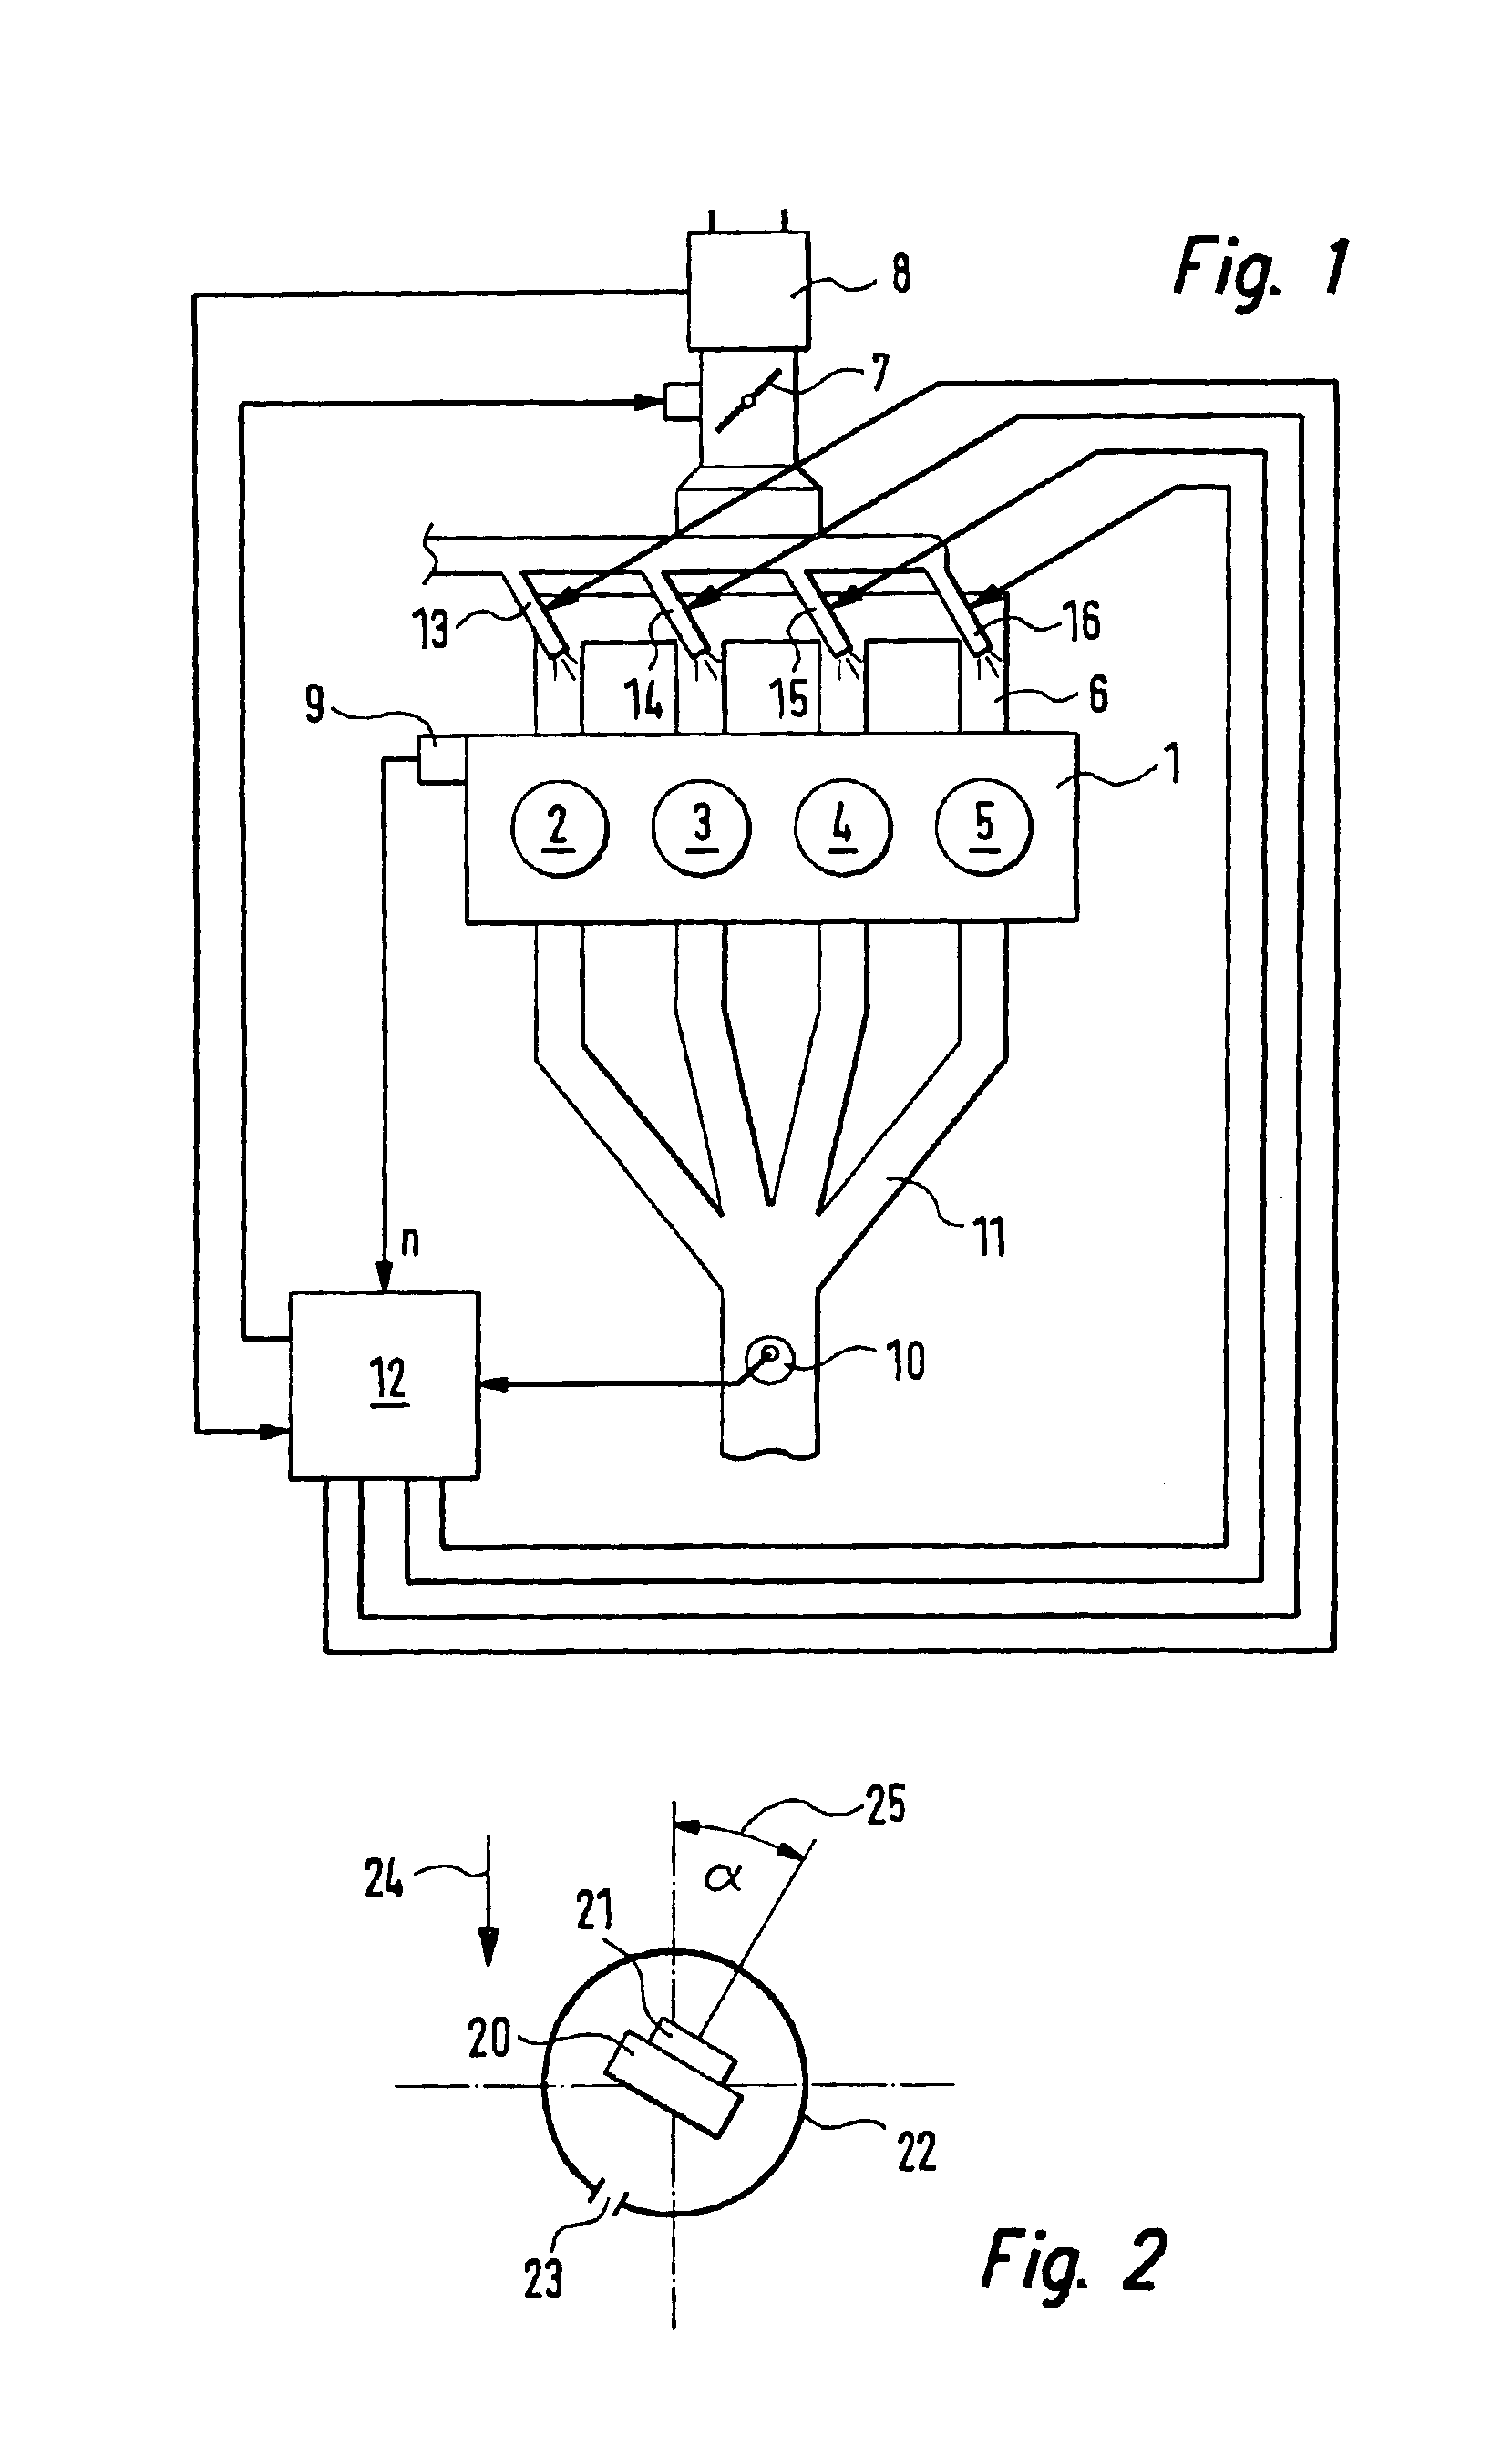 Method for determining the fuel/air ratio in the individual cylinders of a multi-cylinder internal combustion engine